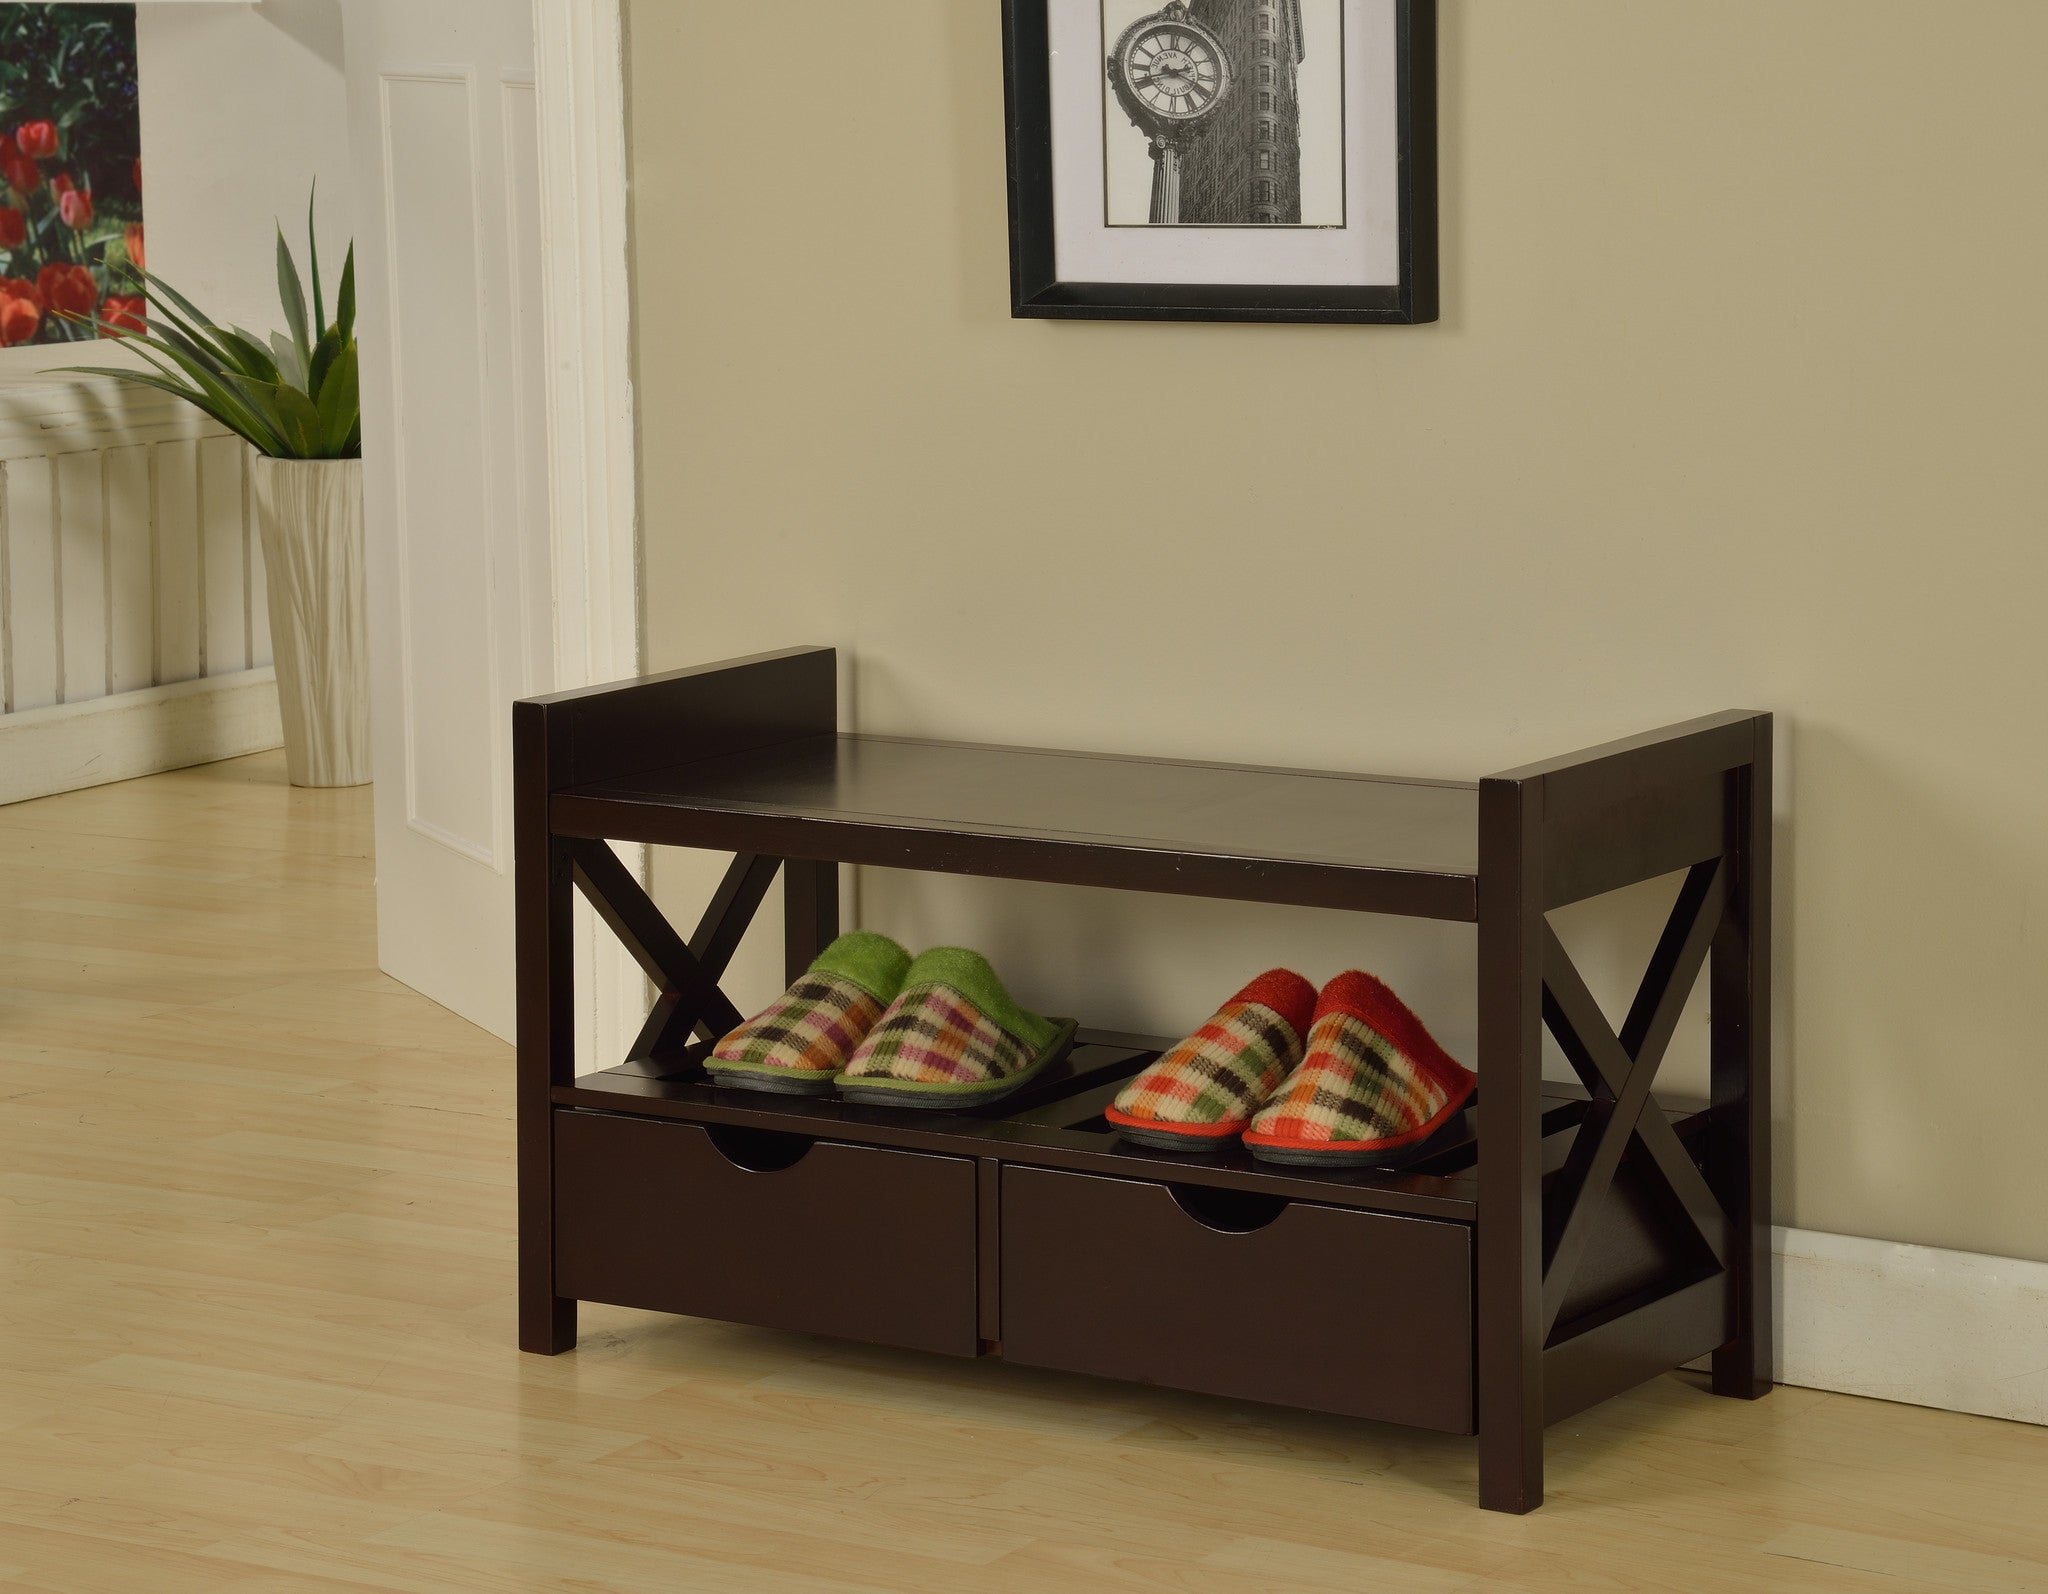 Tavia Shoe Storage Bench With Drawers Open Shelf Cherry Wood Contemporary Pilaster Designs